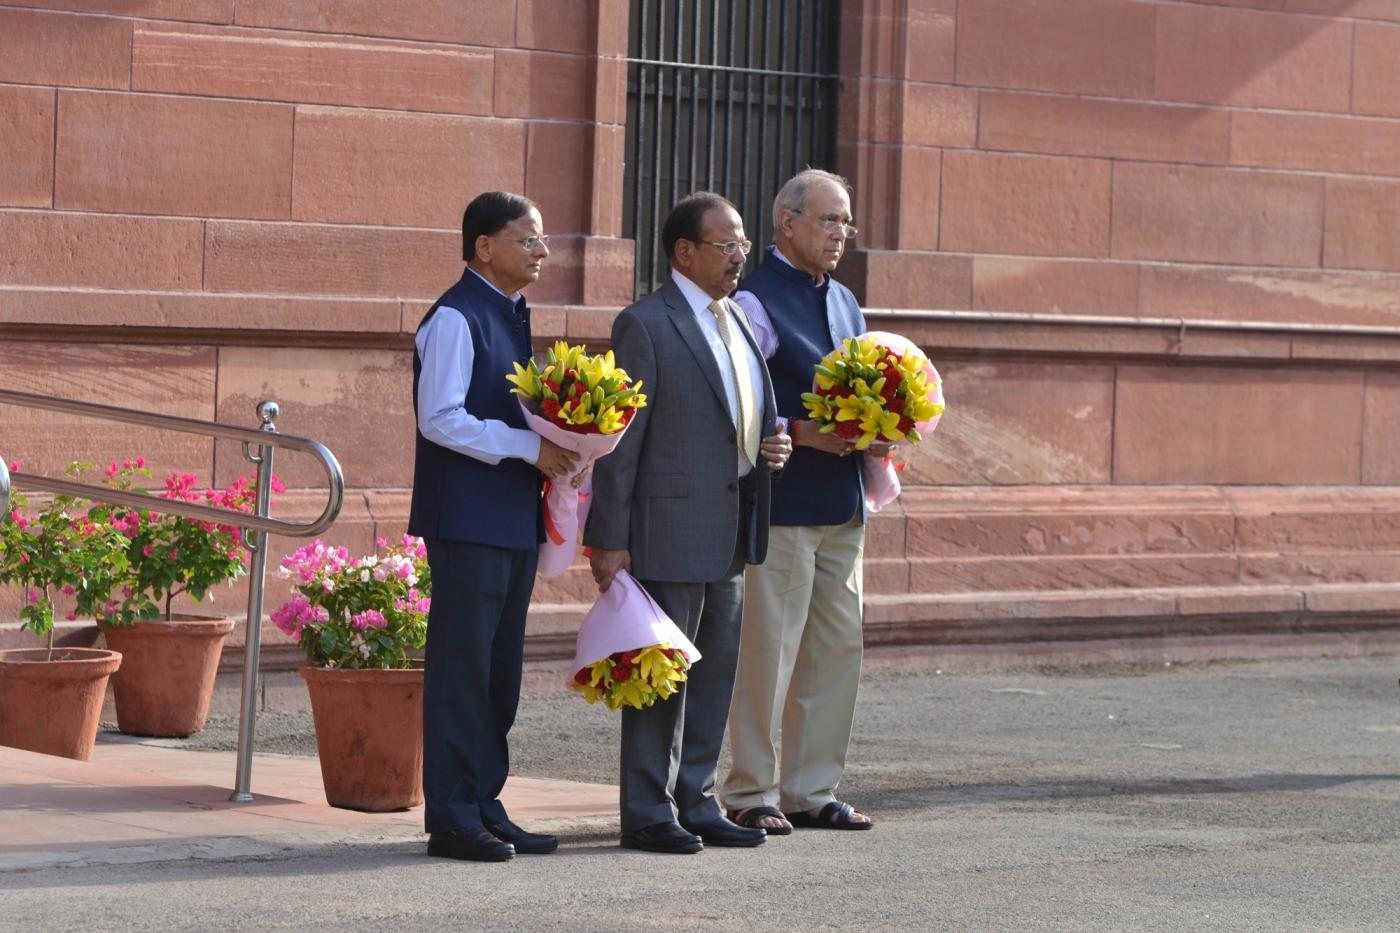 New Delhi: Principal Secretary to the Prime Minister, Nripendra Misra, National Security Adviser Ajit Doval and the Additional Principal Secretary to the Prime Minister P.K. Mishra as they wait for the arrival of Prime Minister Narendra Modi, at South Block in New Delhi, on May 31, 2019. (Photo: IANS) by . 